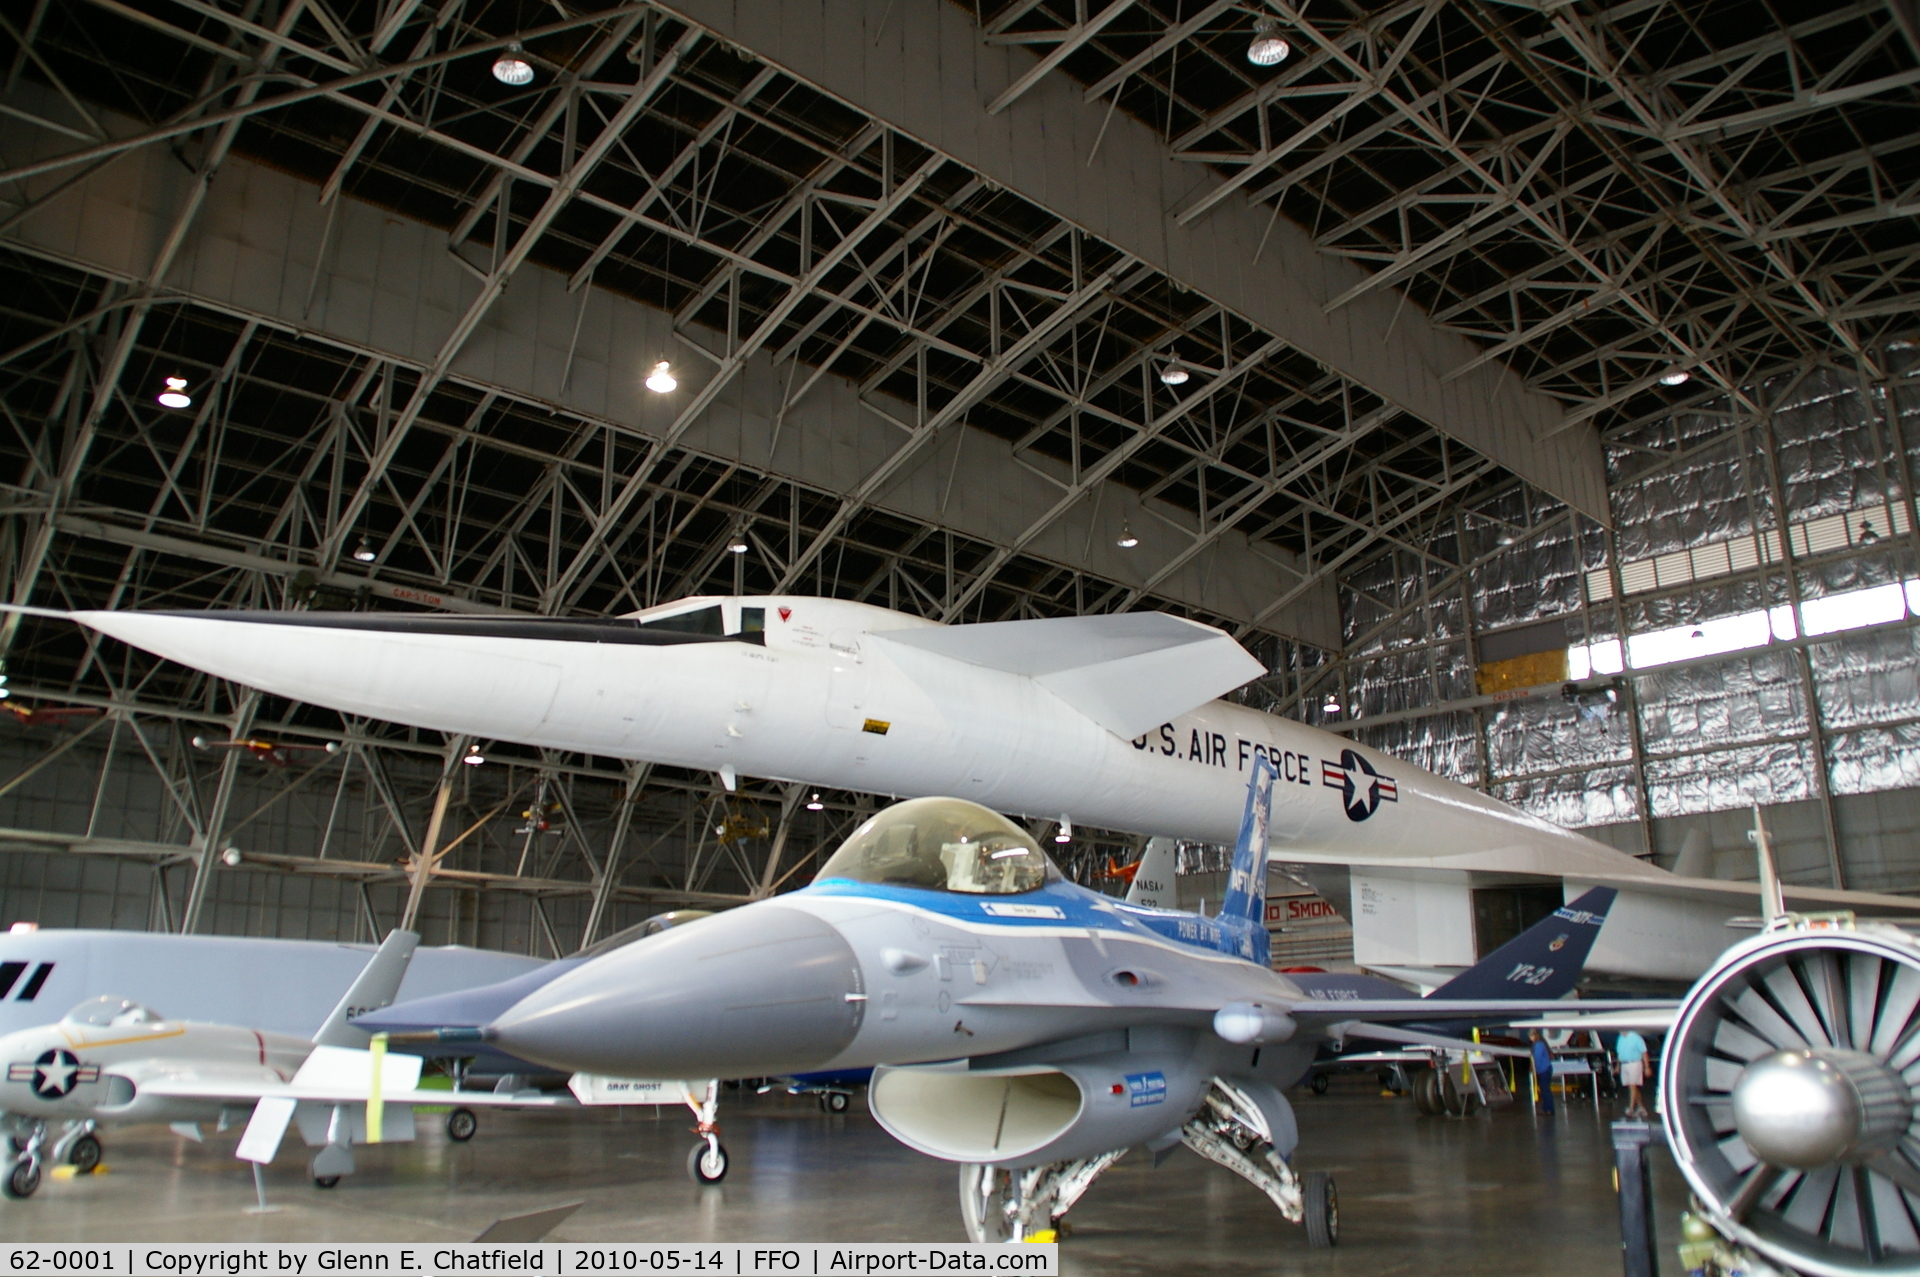 62-0001, 1964 North American XB-70A Valkyrie C/N 278-1, At the National Museum of the USAF